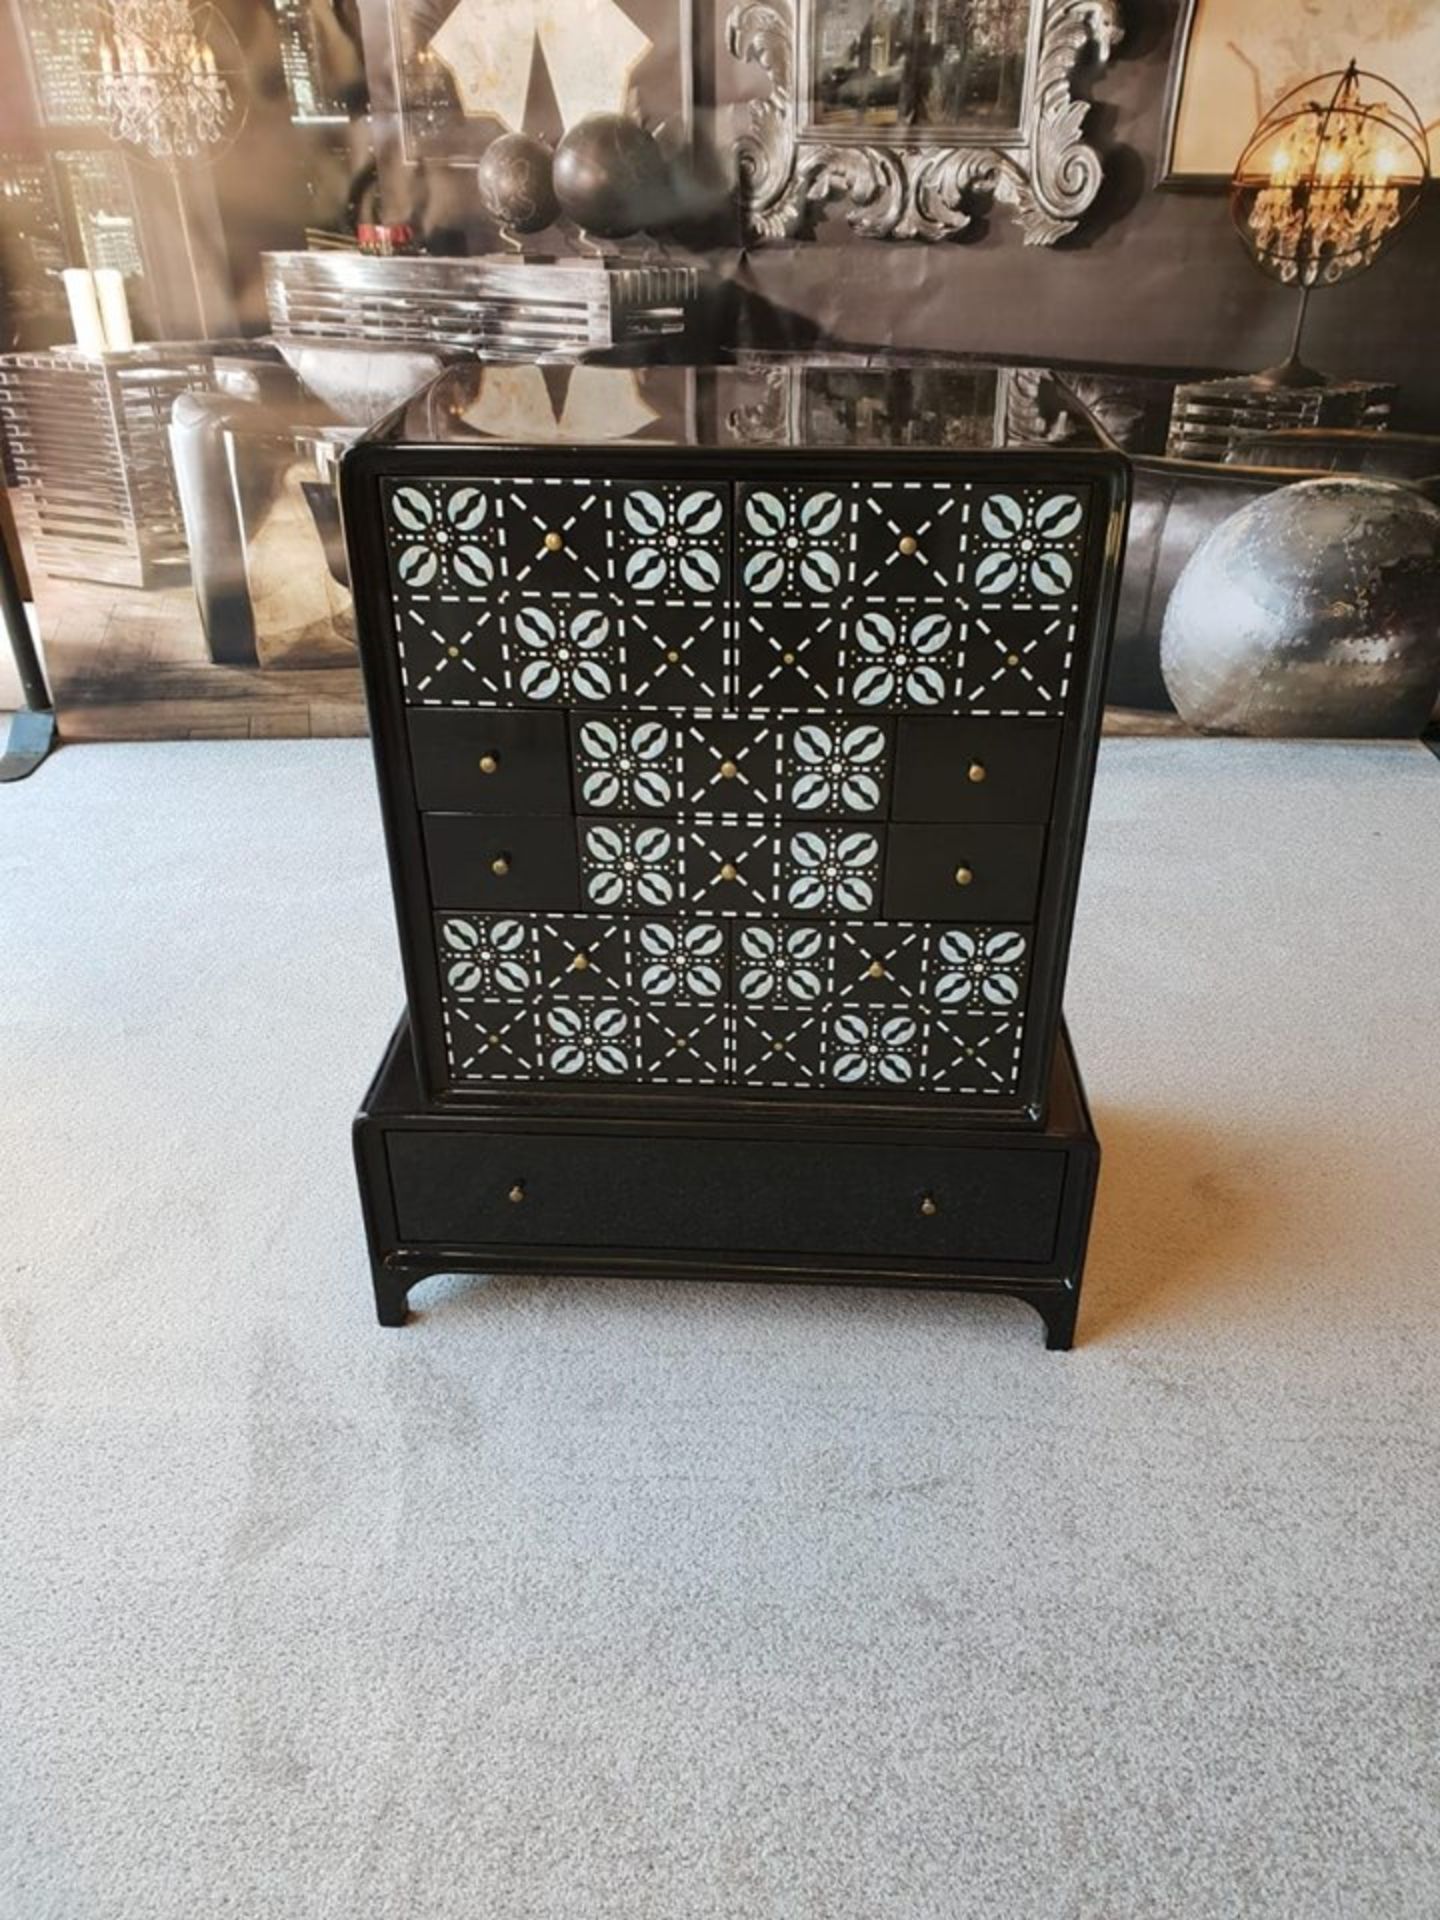 Shellshock Baby Bureau Desinged By Tracey Boyd A Beautiful Black Lacquered Compact Bureau With A - Image 2 of 2